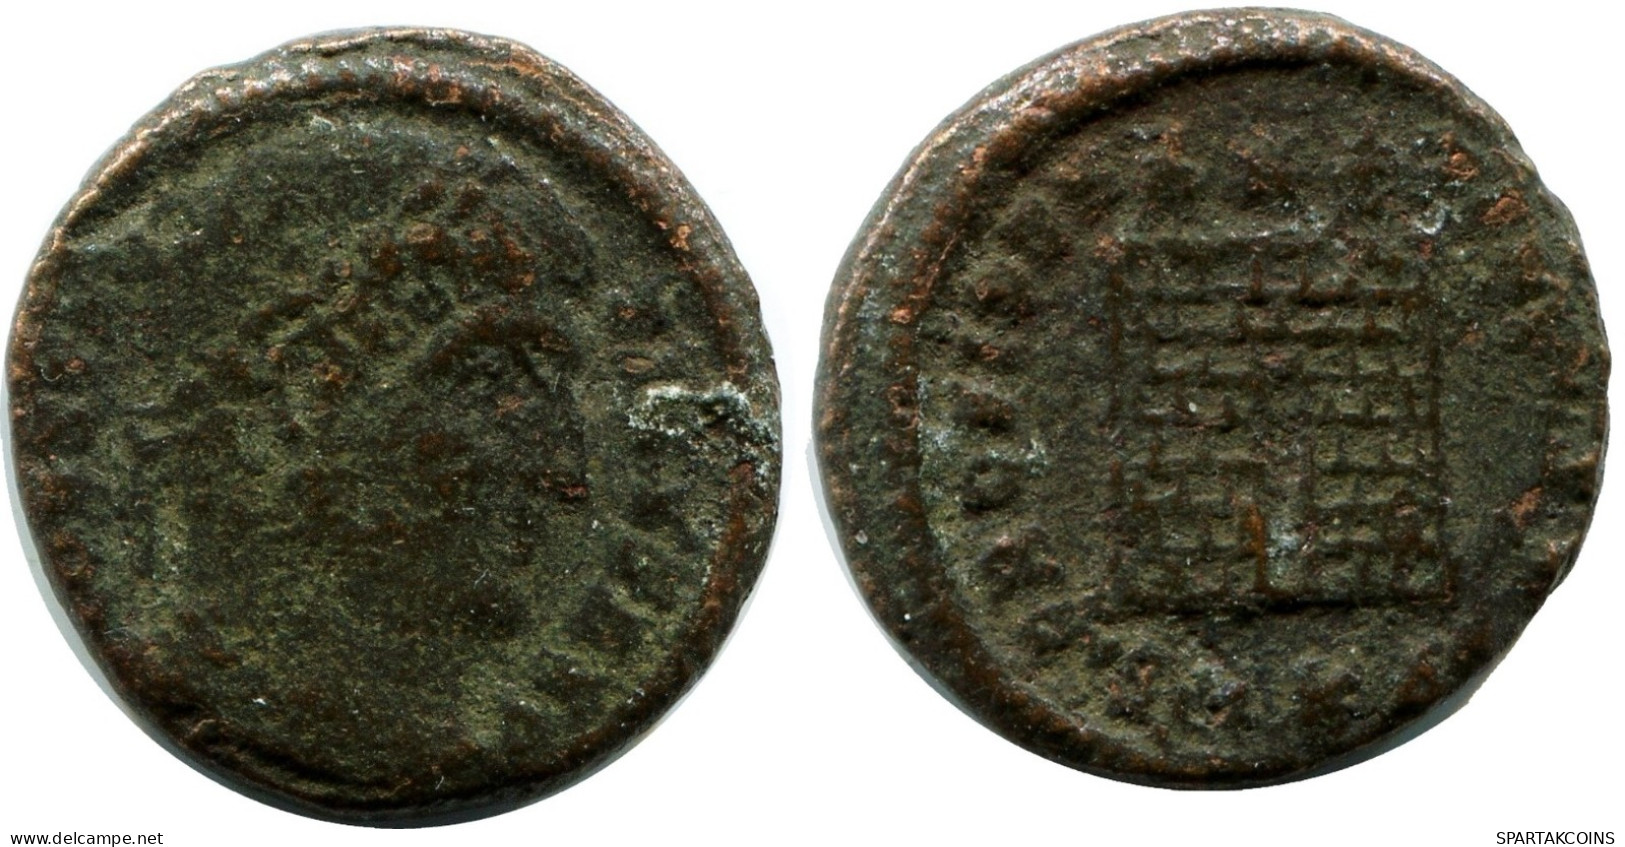 CONSTANTINE I MINTED IN CYZICUS FROM THE ROYAL ONTARIO MUSEUM #ANC11002.14.E.A - L'Empire Chrétien (307 à 363)